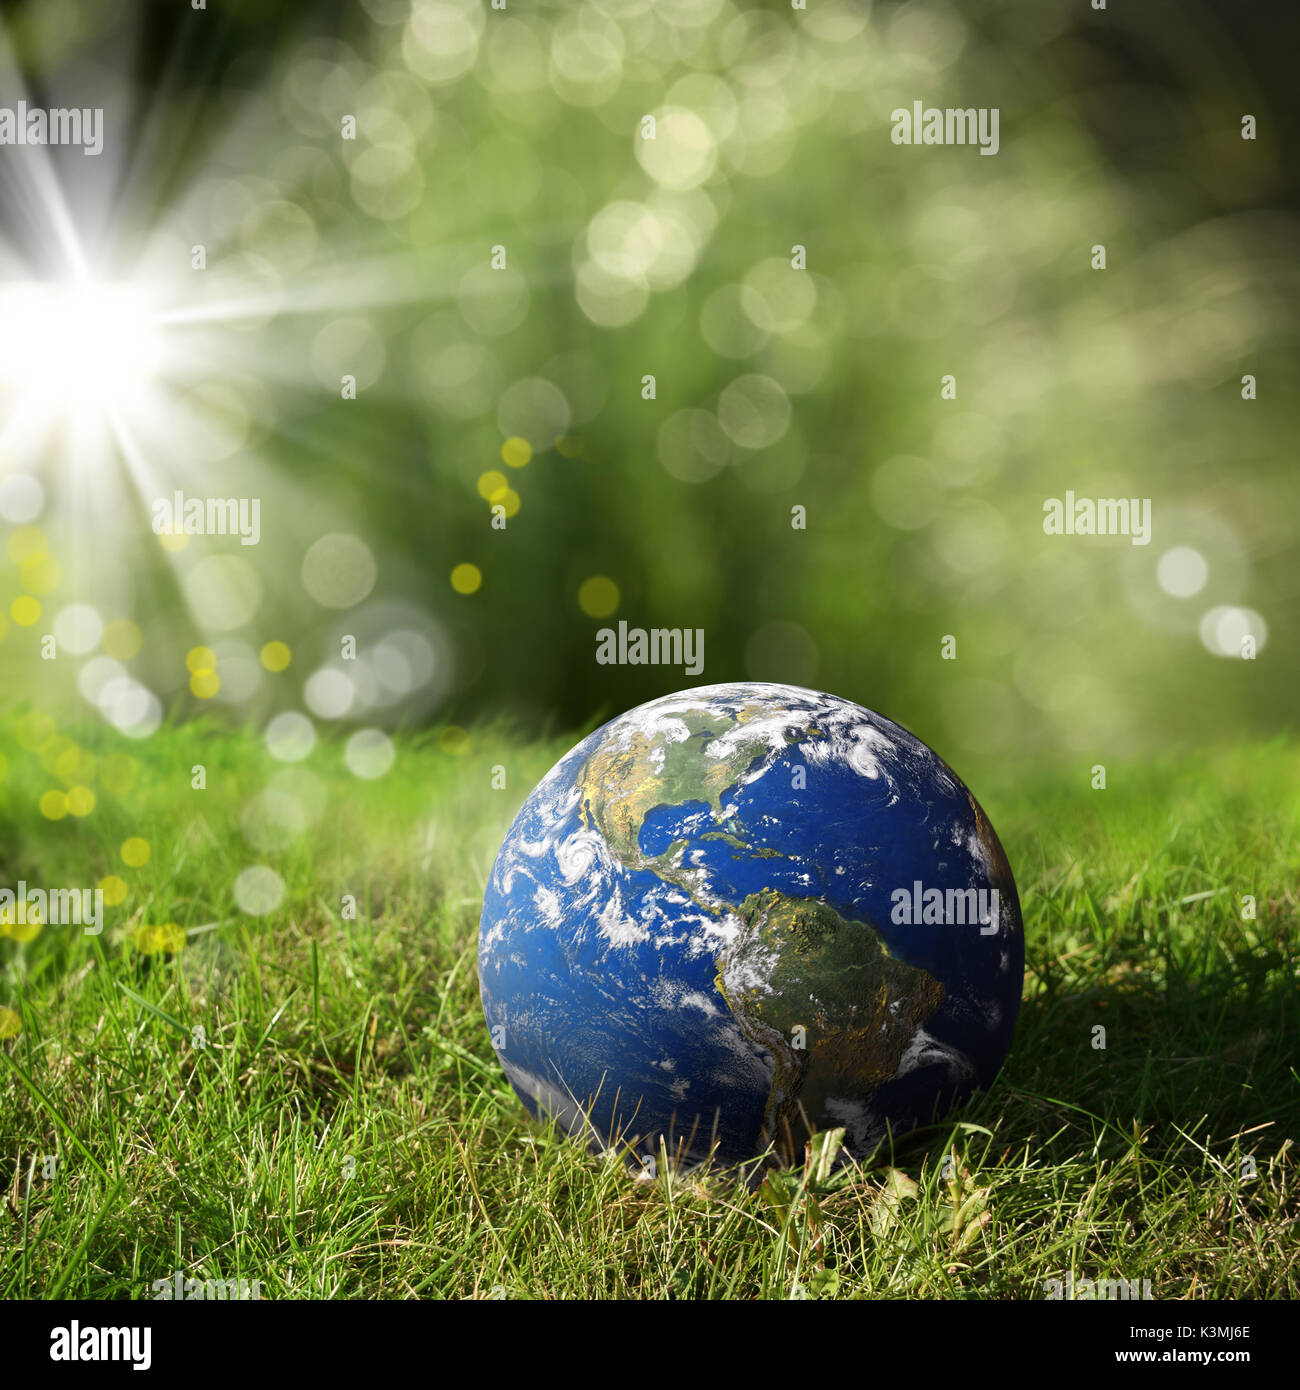 conceptual image of globe on green landscape and light. Furnished NASA image used for this image. Stock Photo